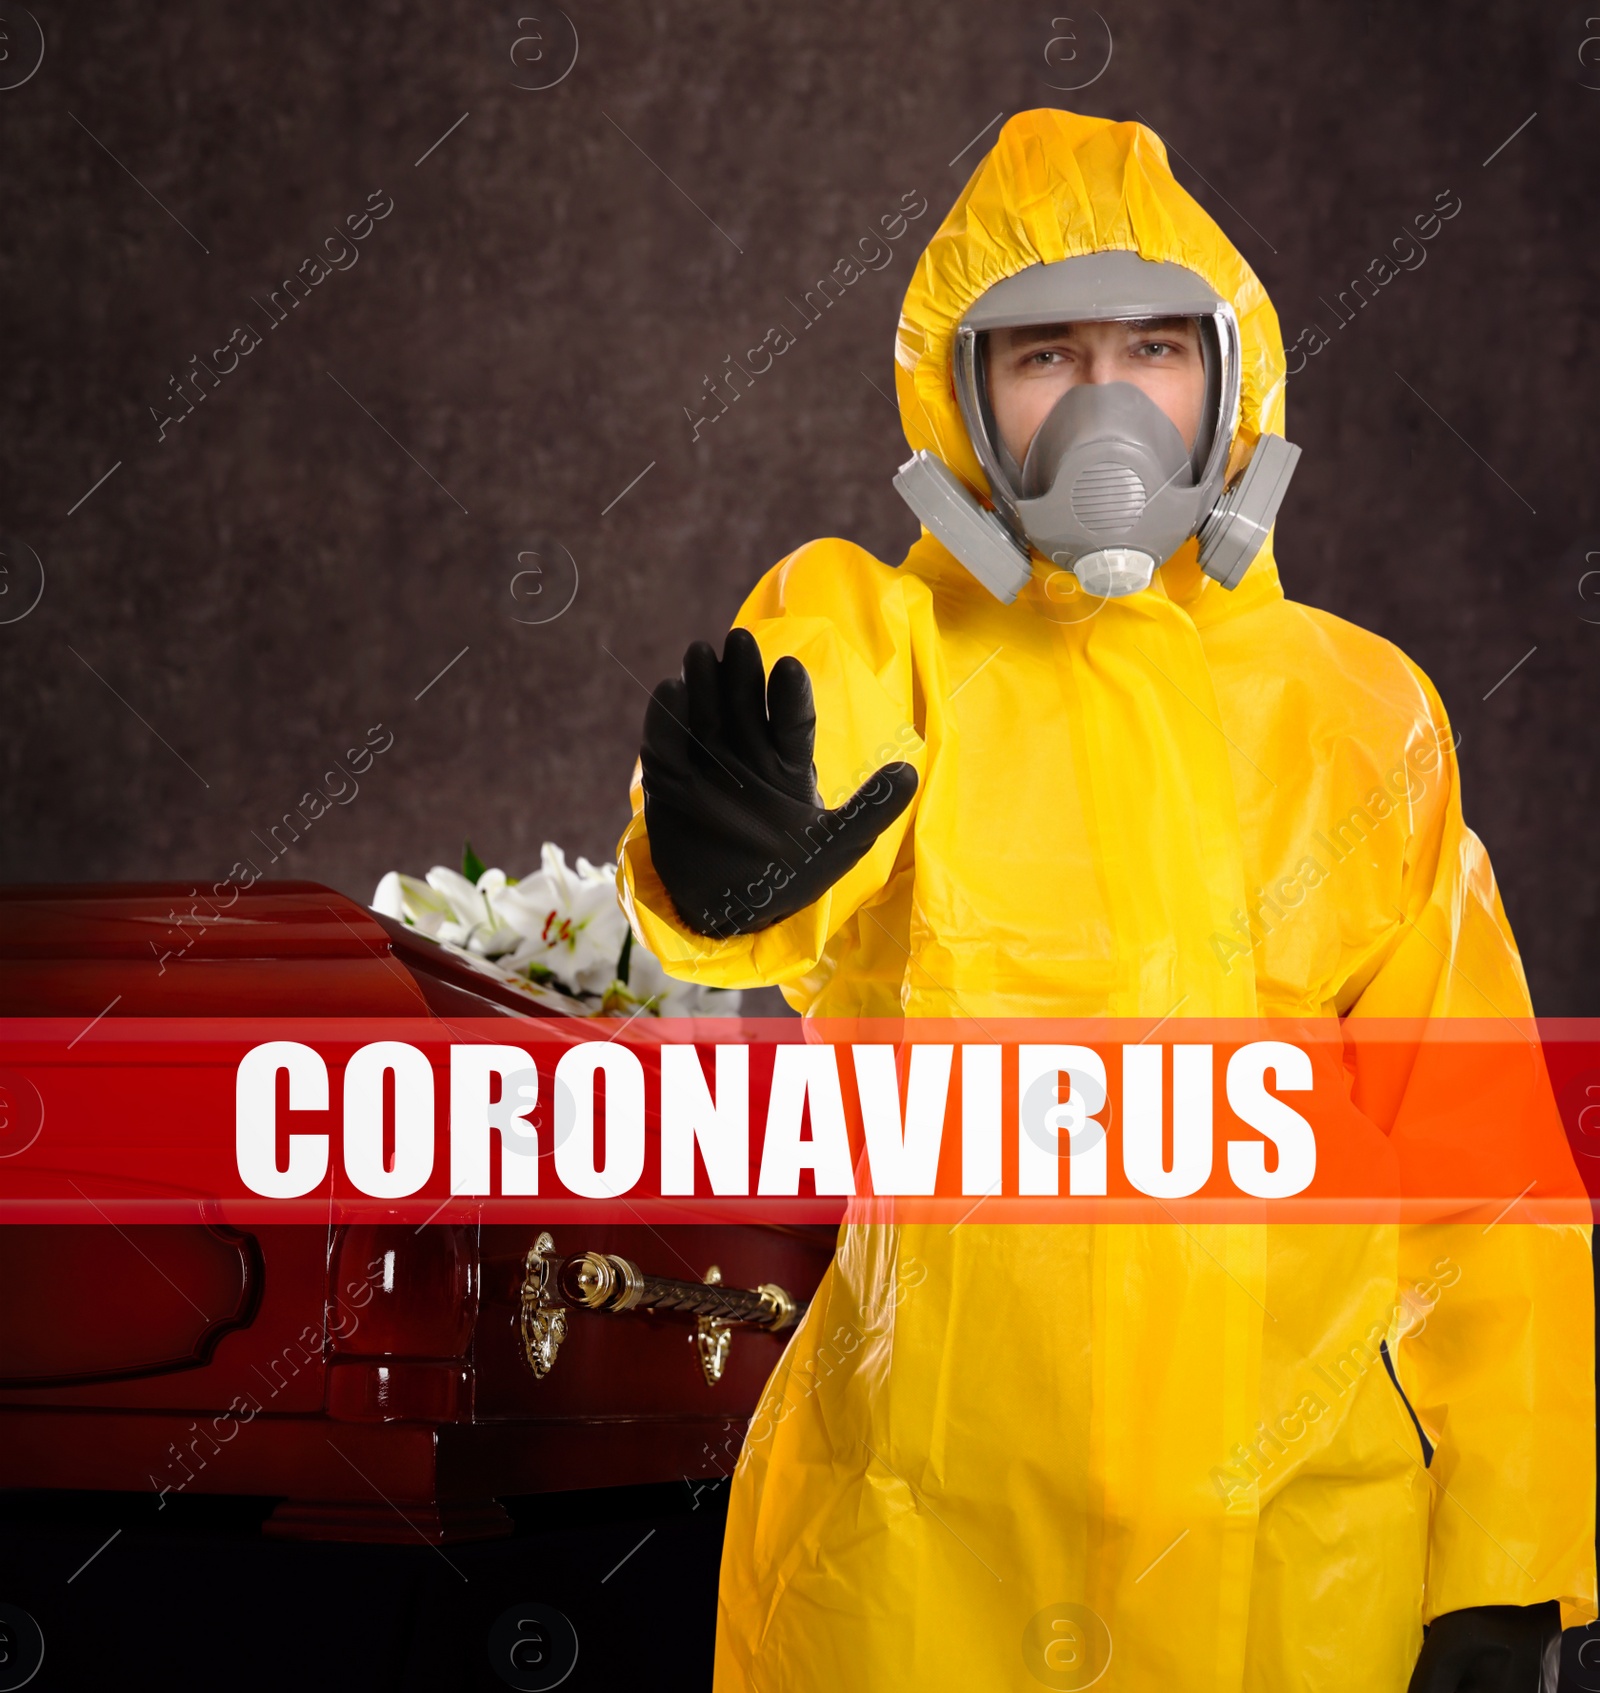 Image of Funeral during coronavirus pandemic. Man in protective suit near casket indoors